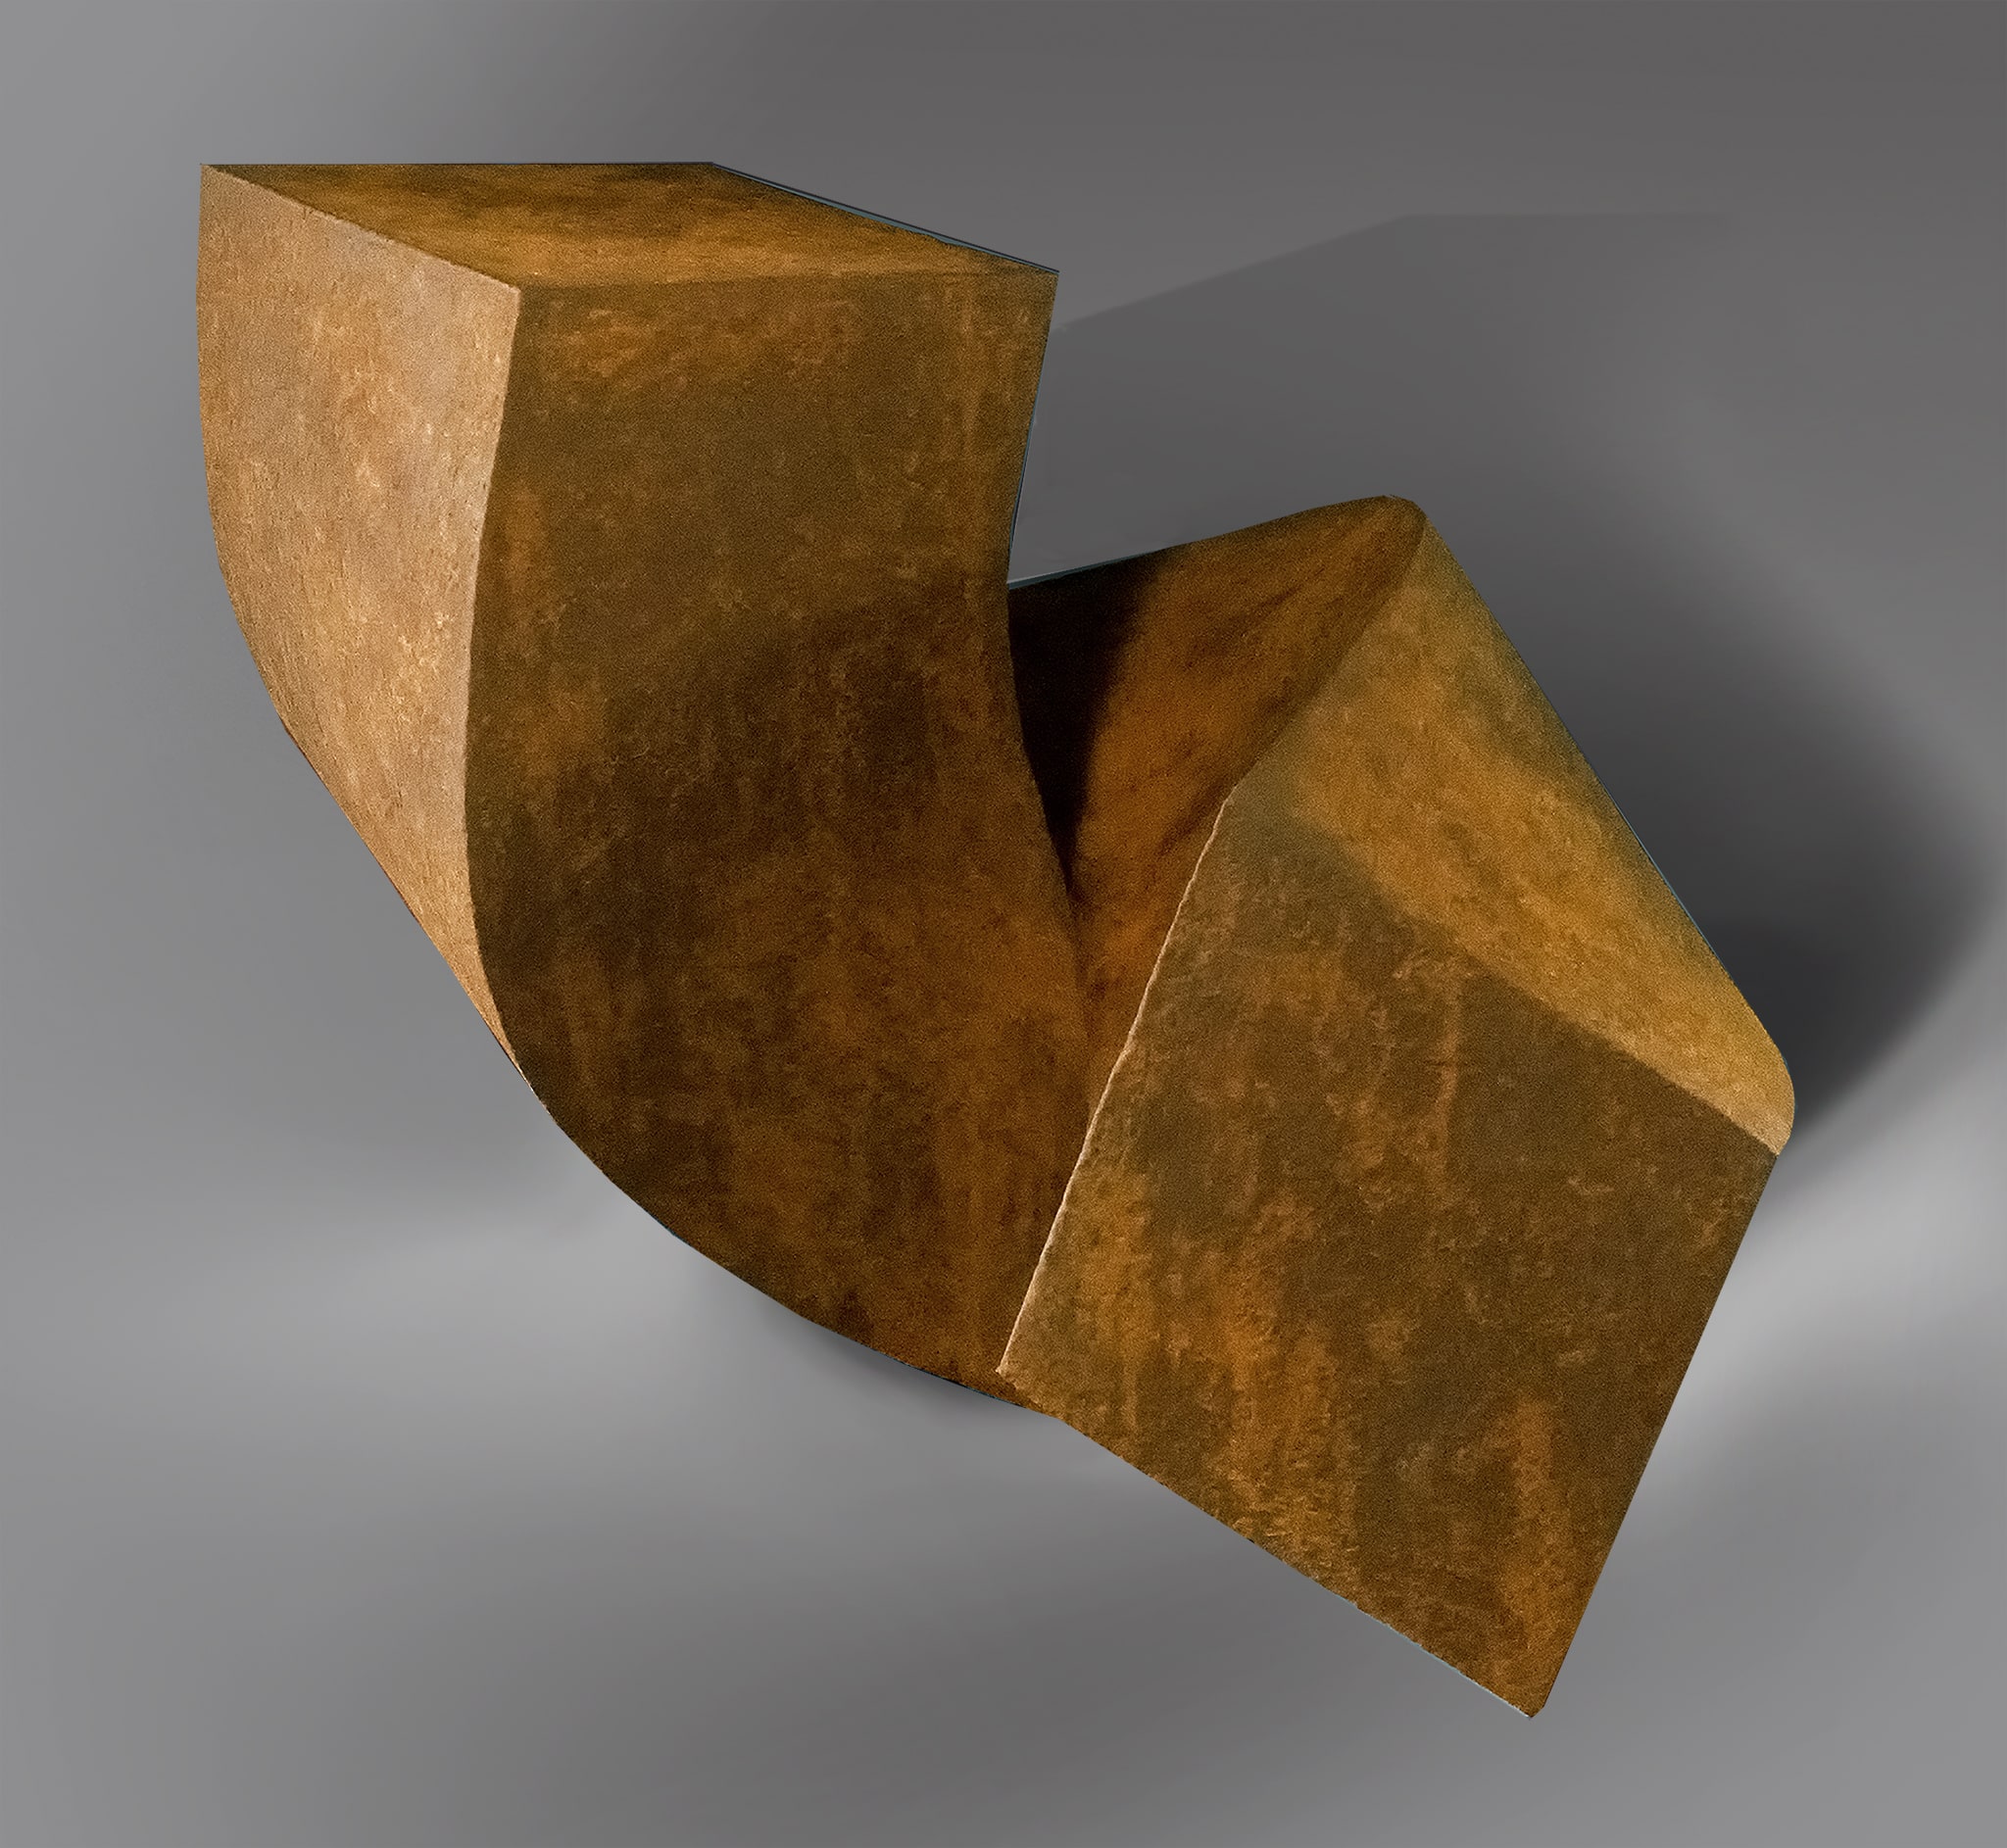 Twisted Lock, 22" x 15" x 15", clay with iron oxide finish